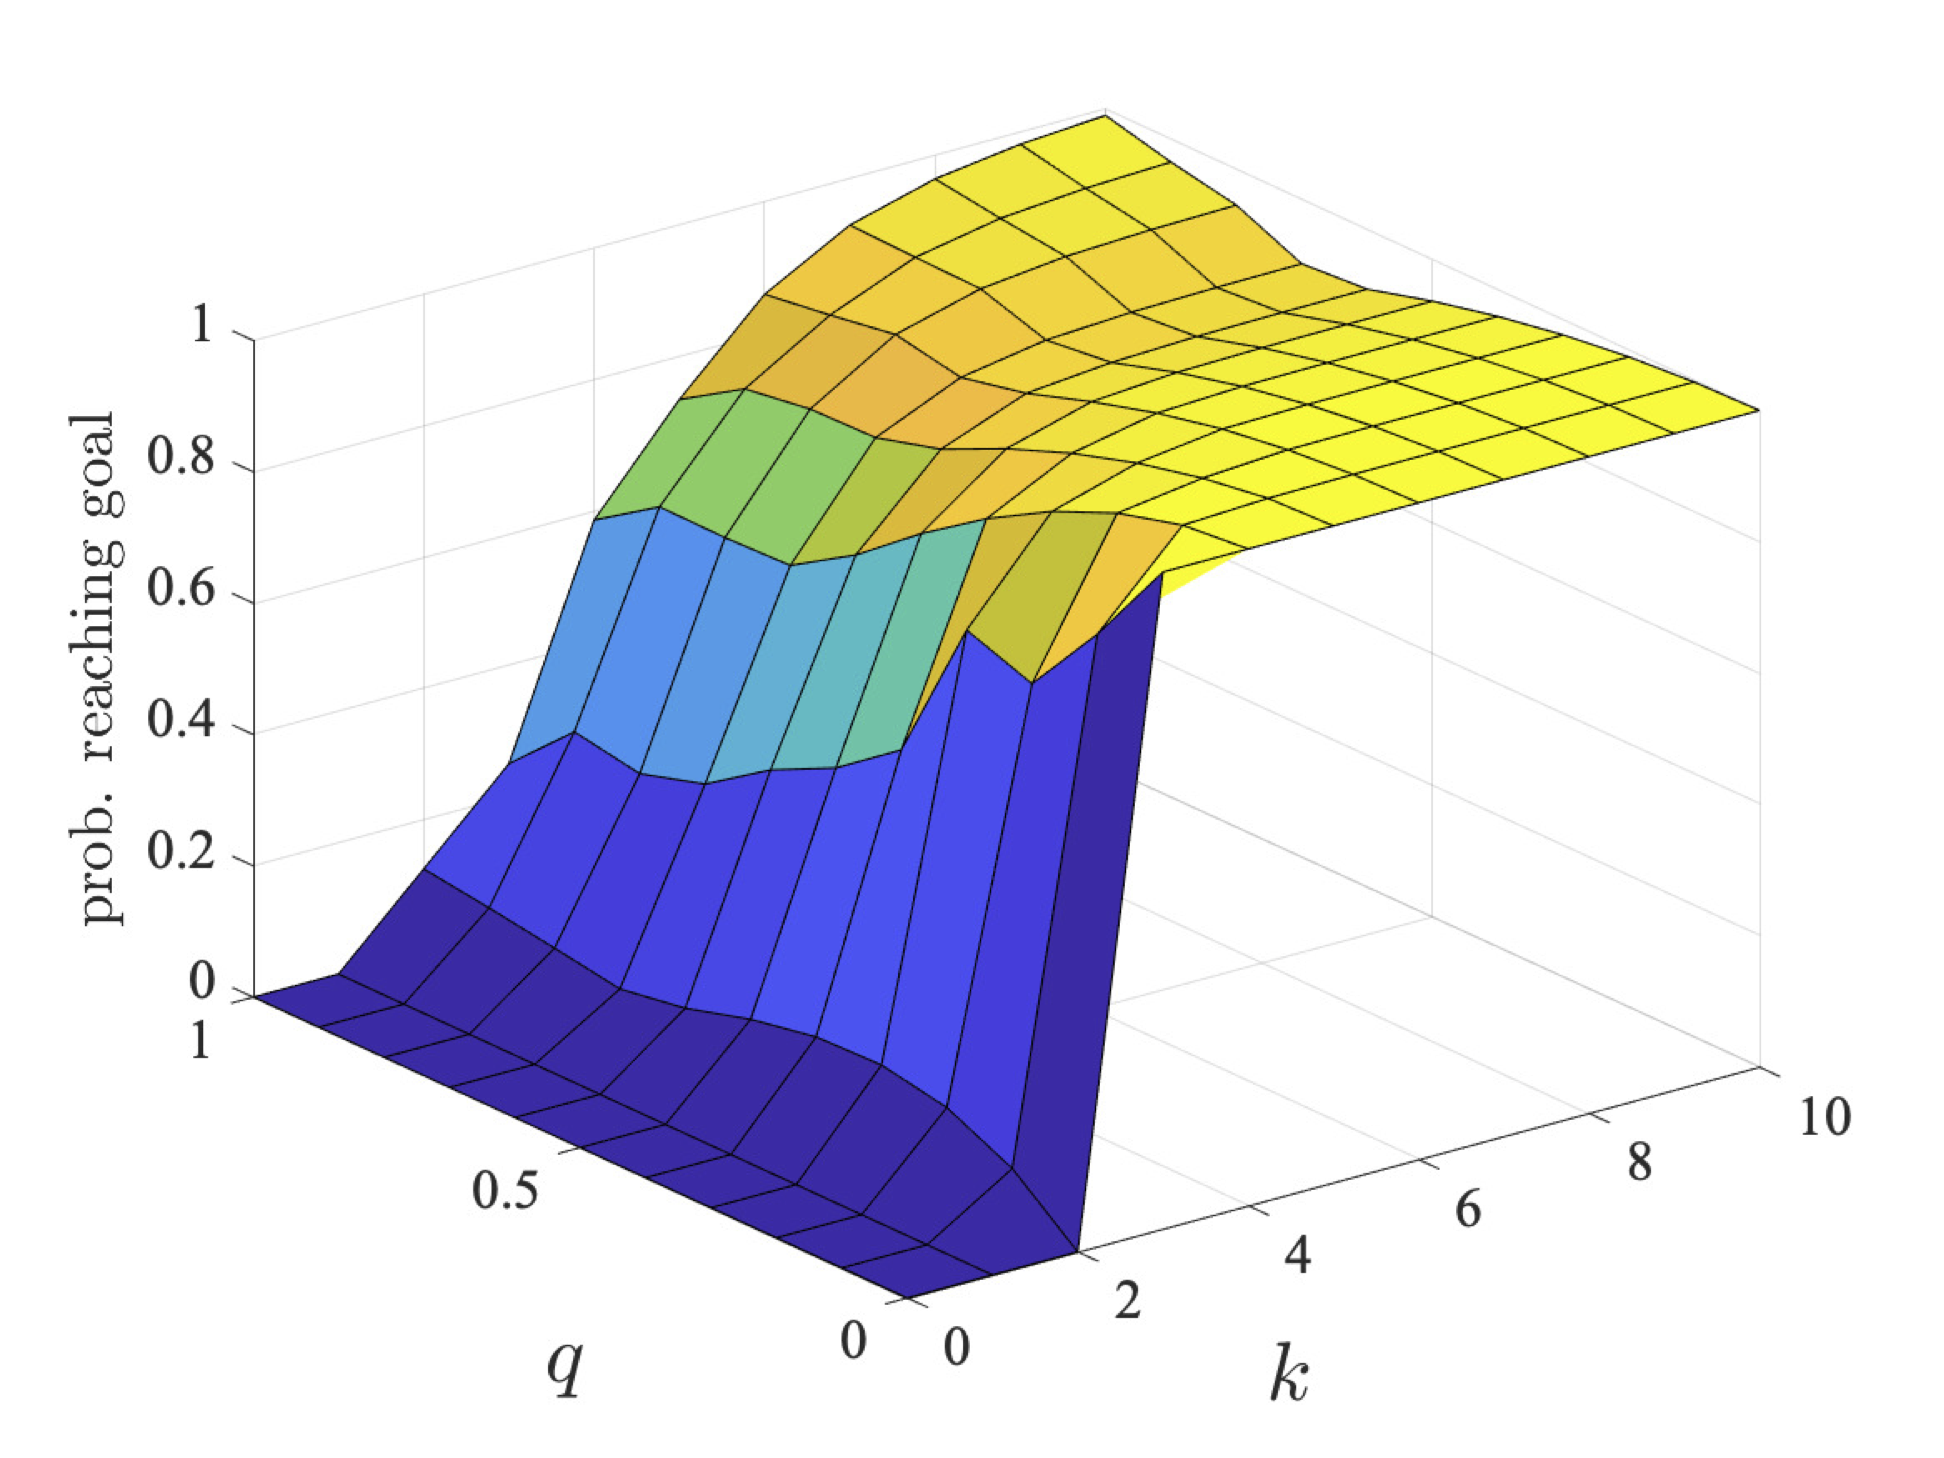 plot: maximum probability robot 2 can ensure they reach their goal within a deadline (l=3)